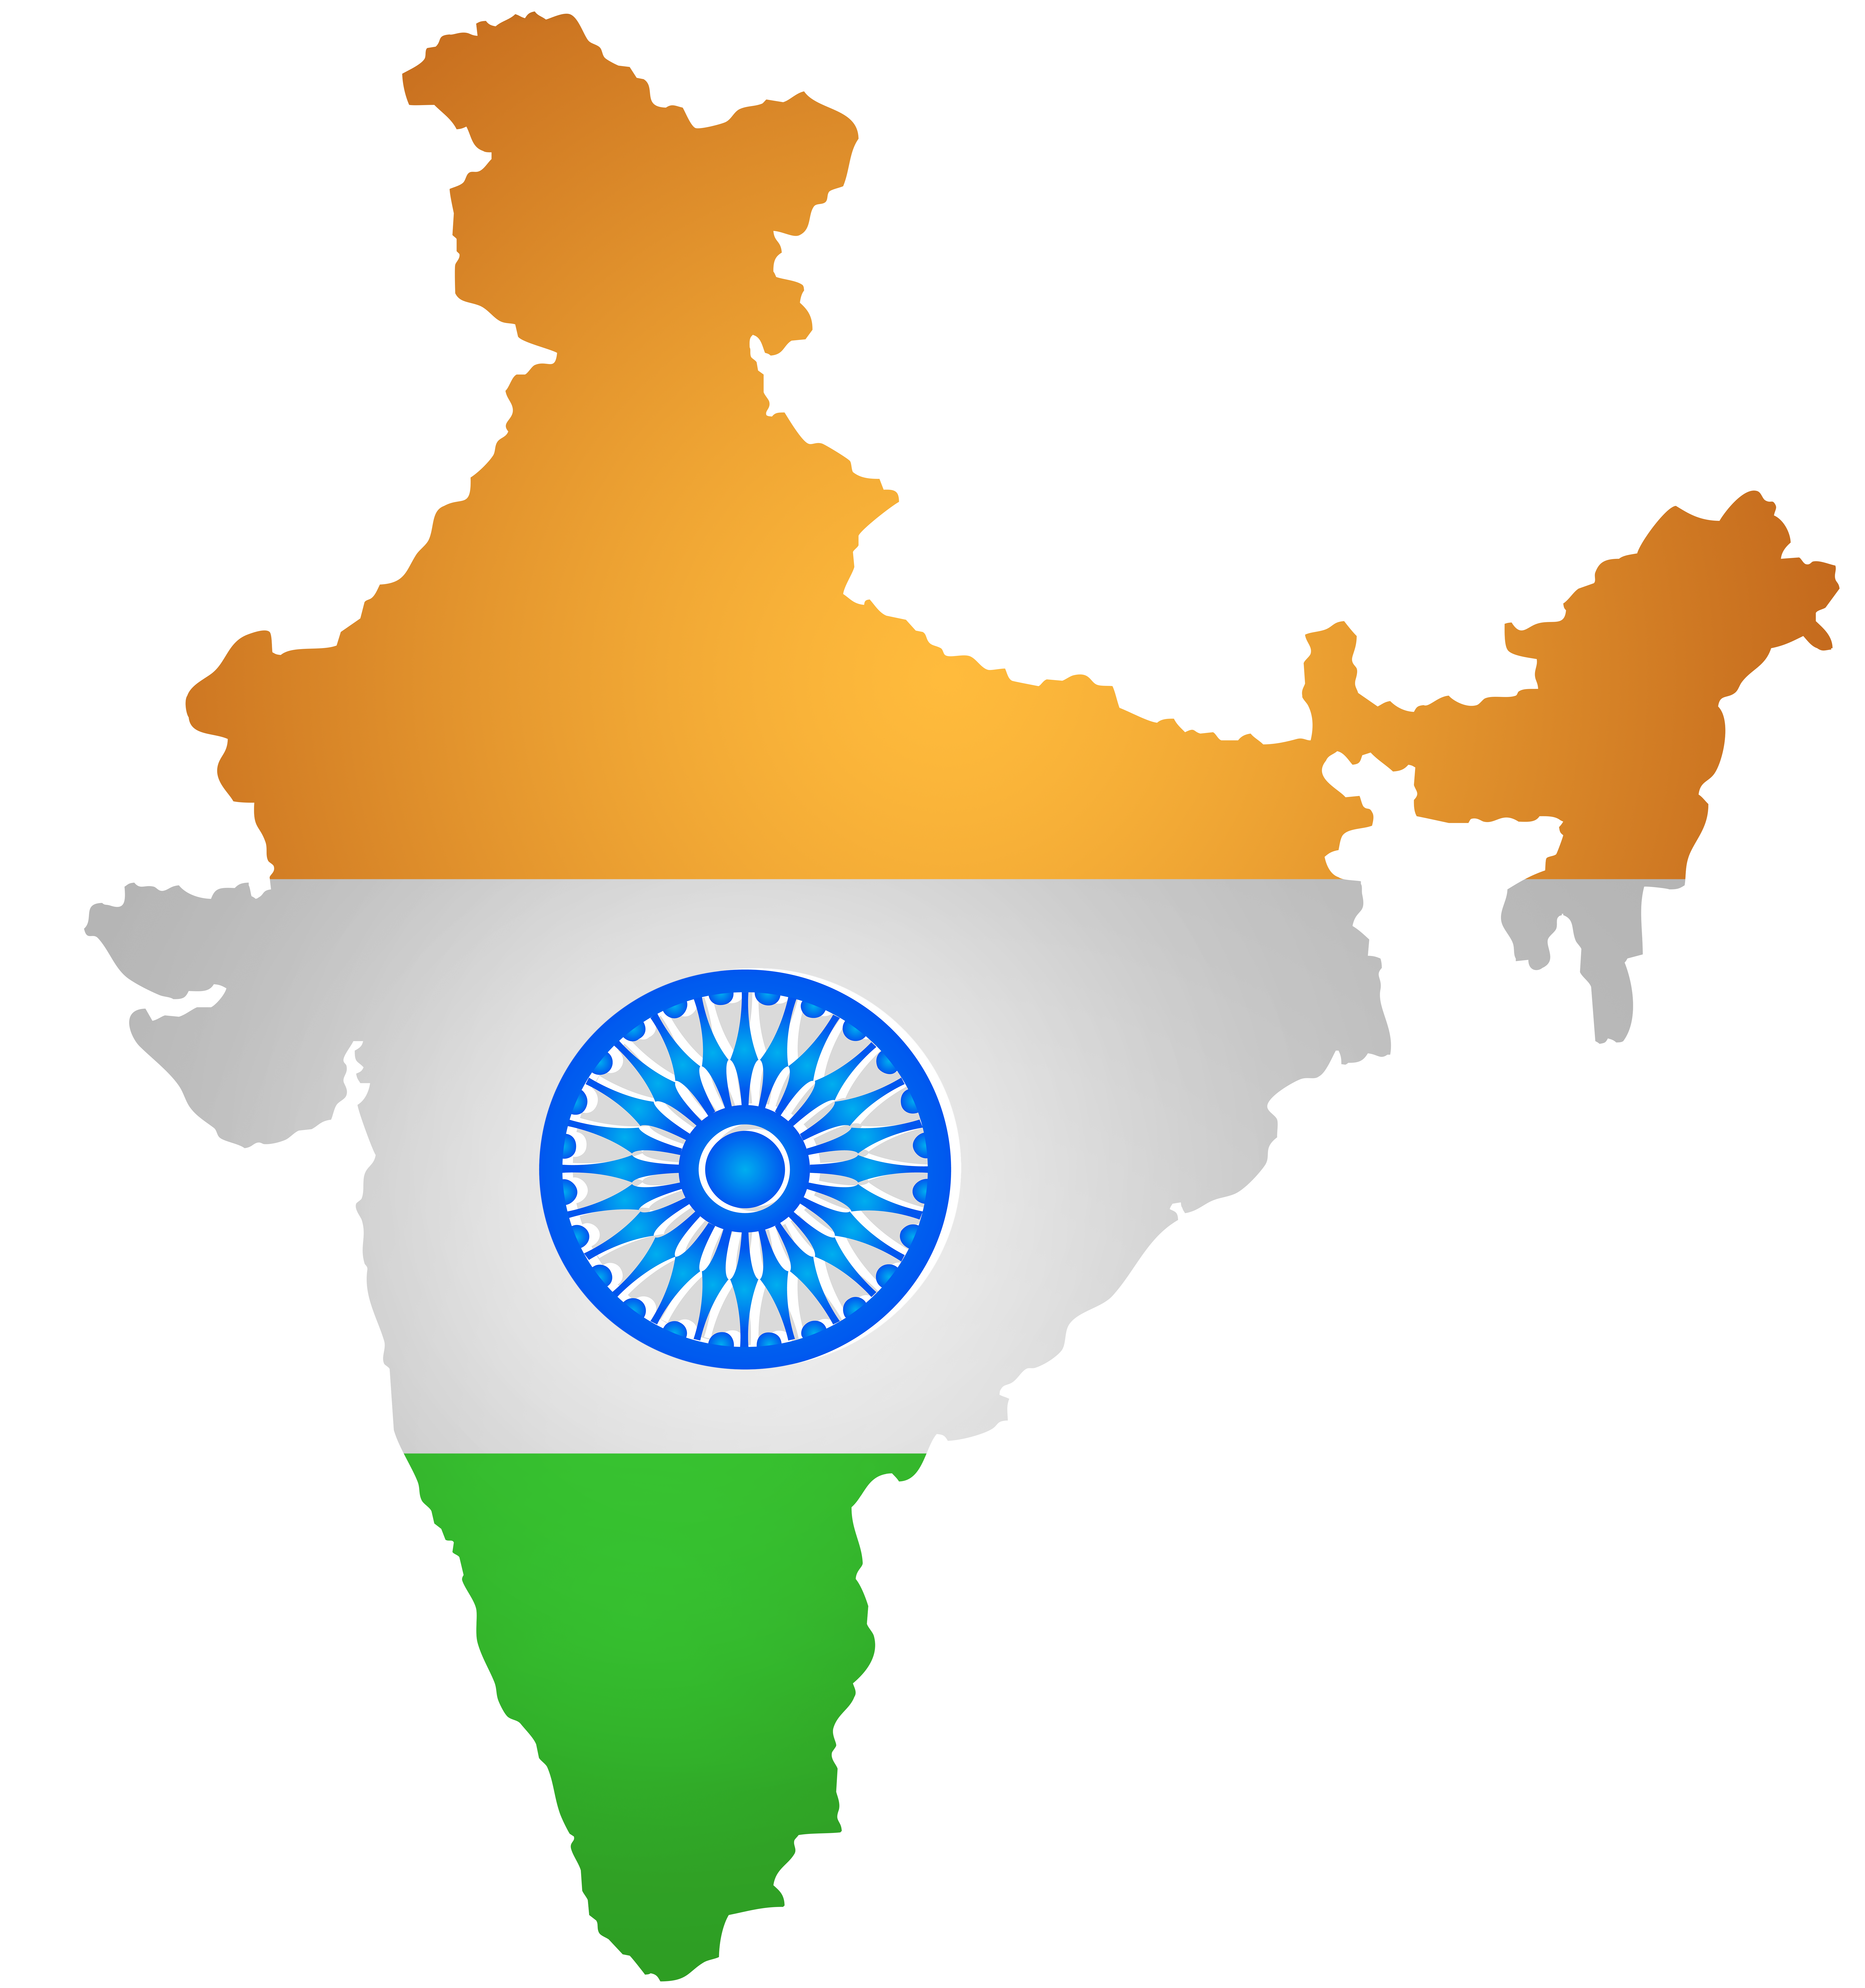 map clipart map indian